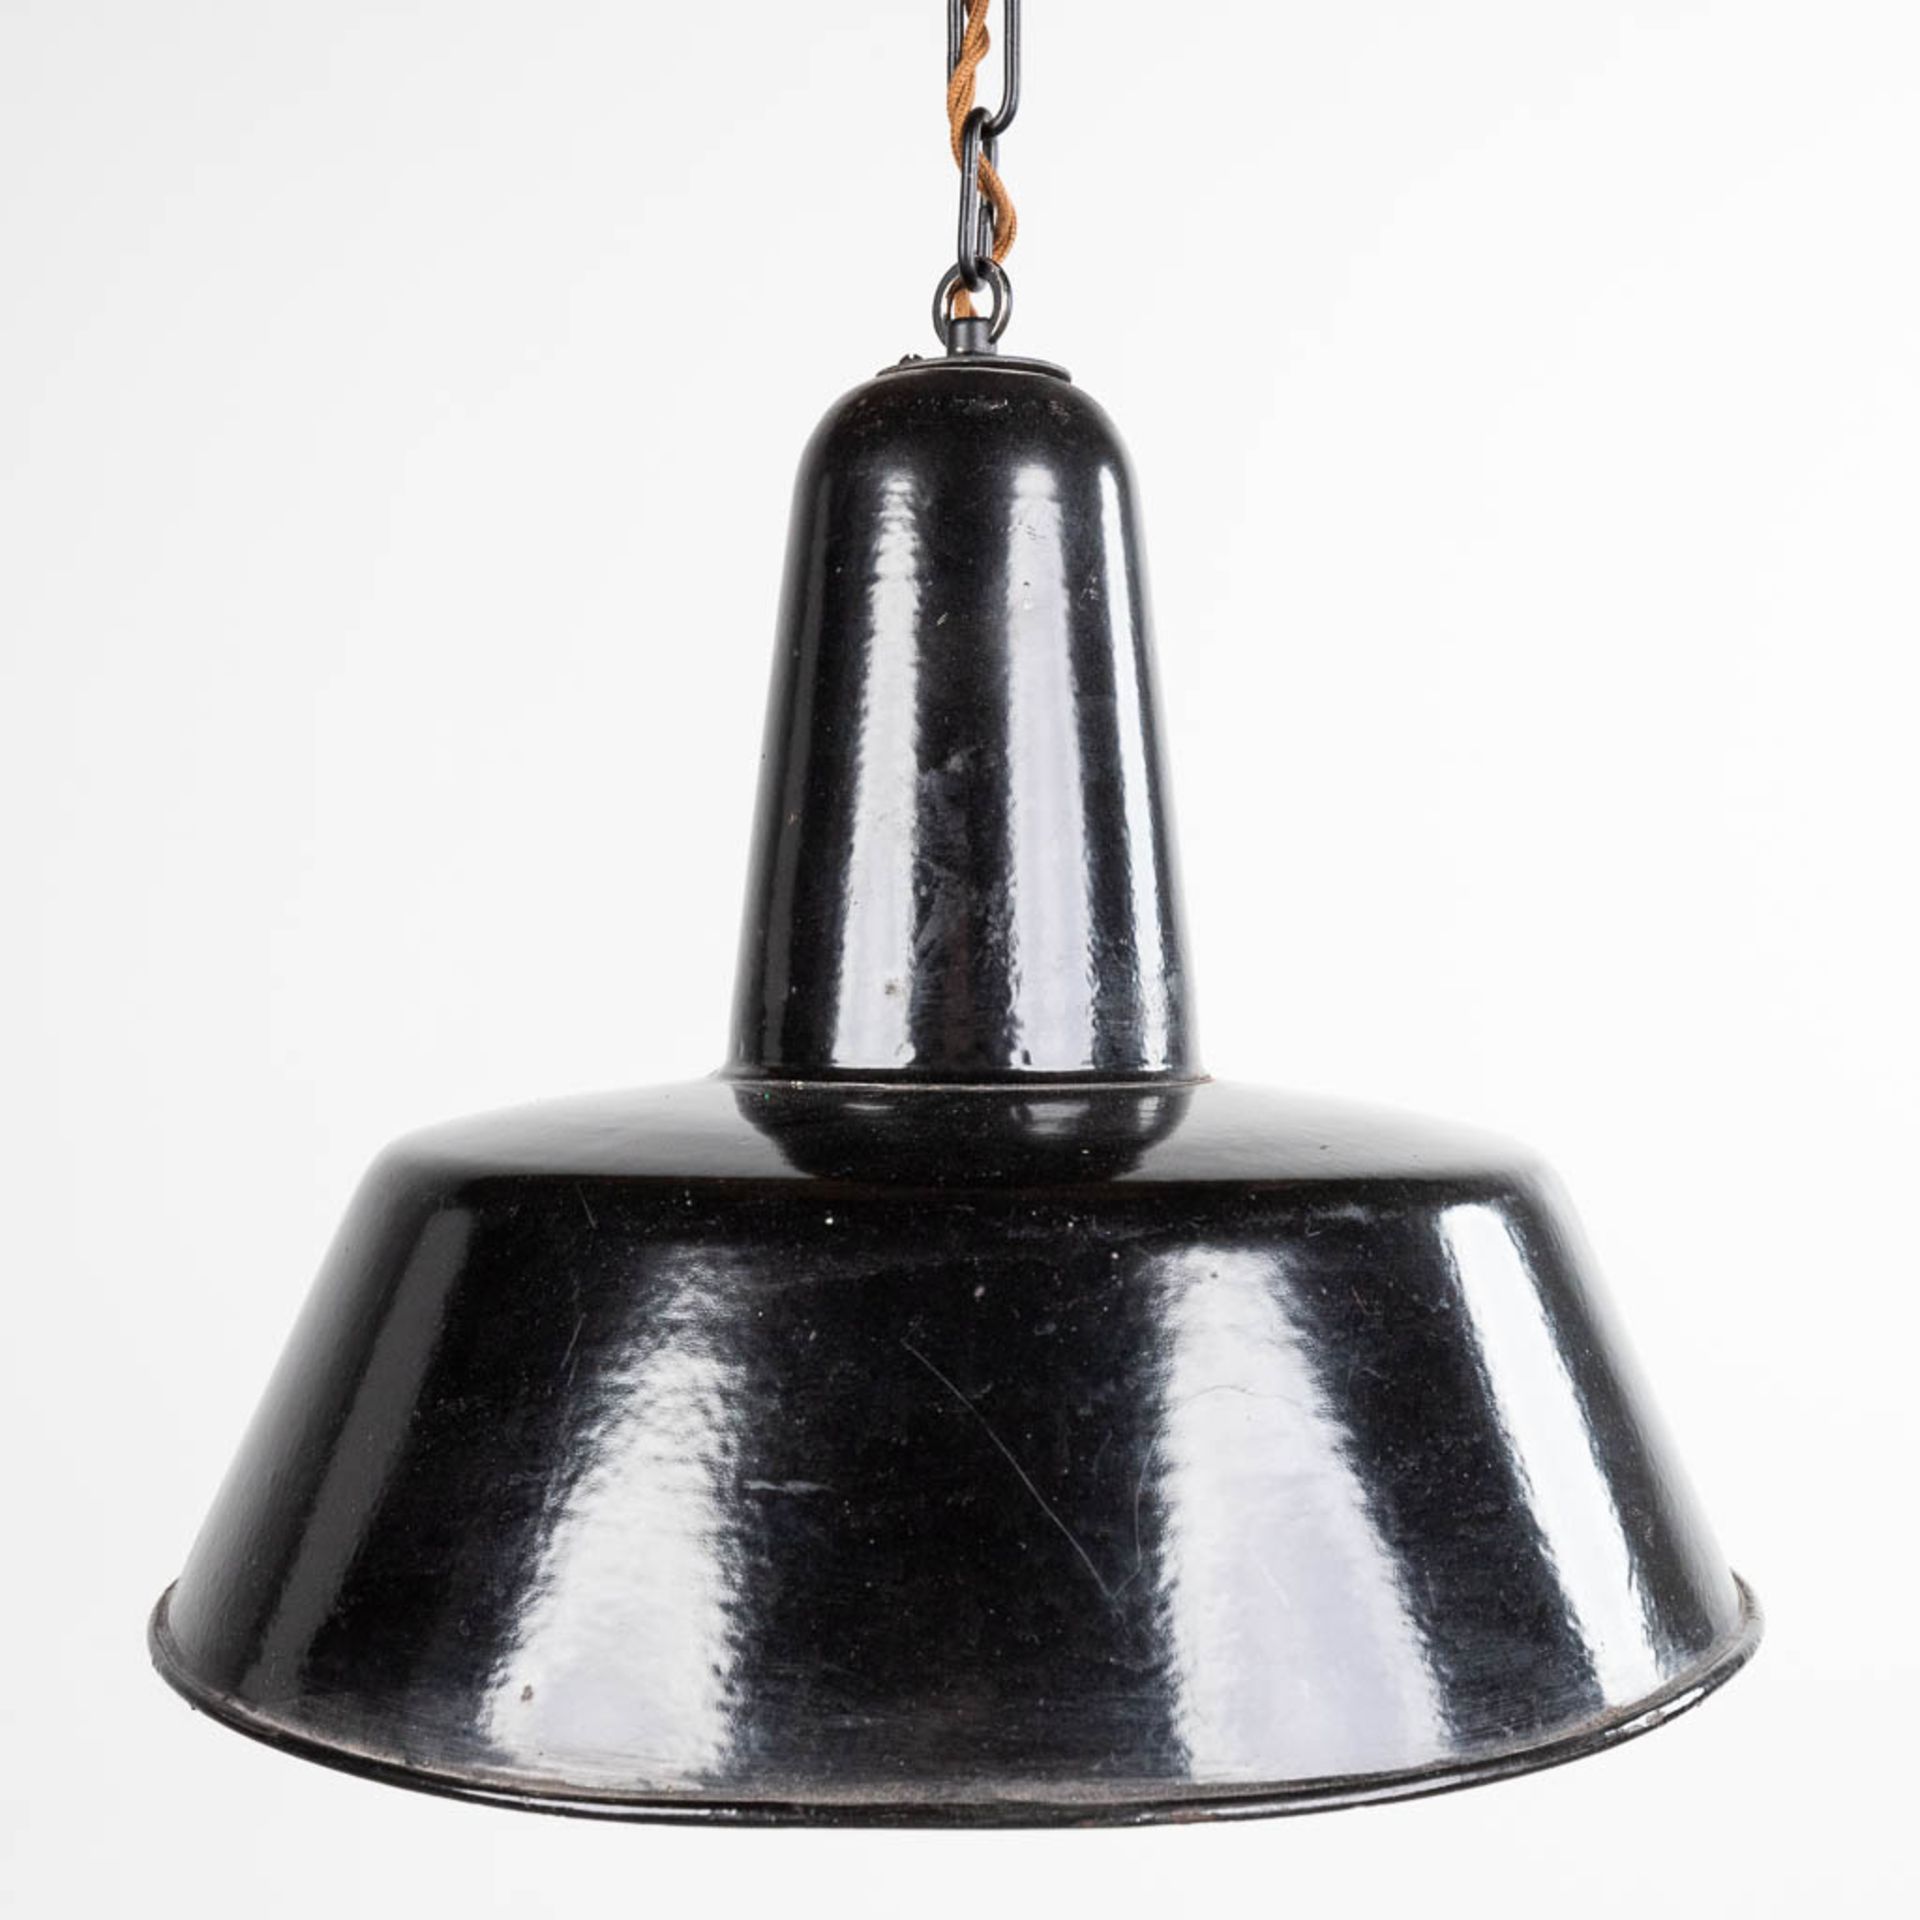 An industrial hanging lamp, with a black and white enamelled lampshade. (W:36 x H:32 cm) - Image 3 of 6